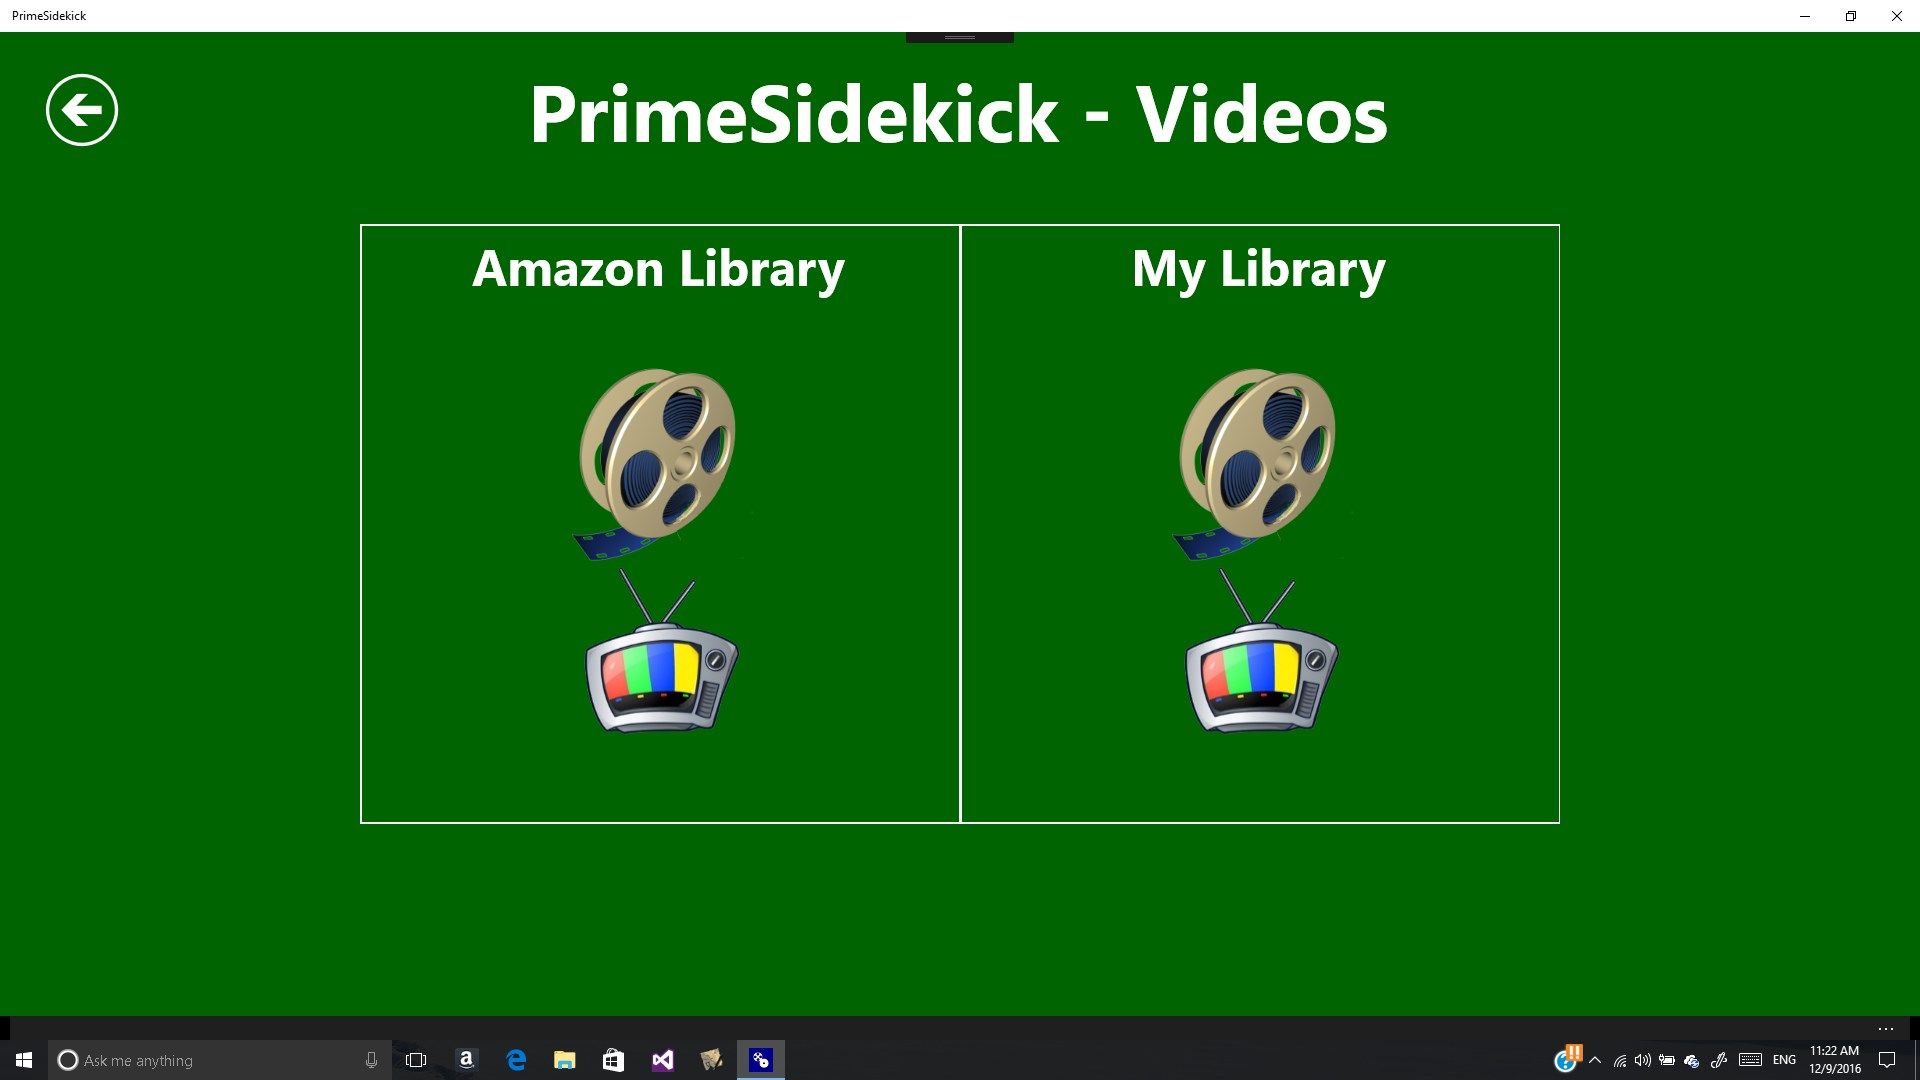 Main screen of the Amazon Prime Video section allowing the user to select either movies or TV shows.